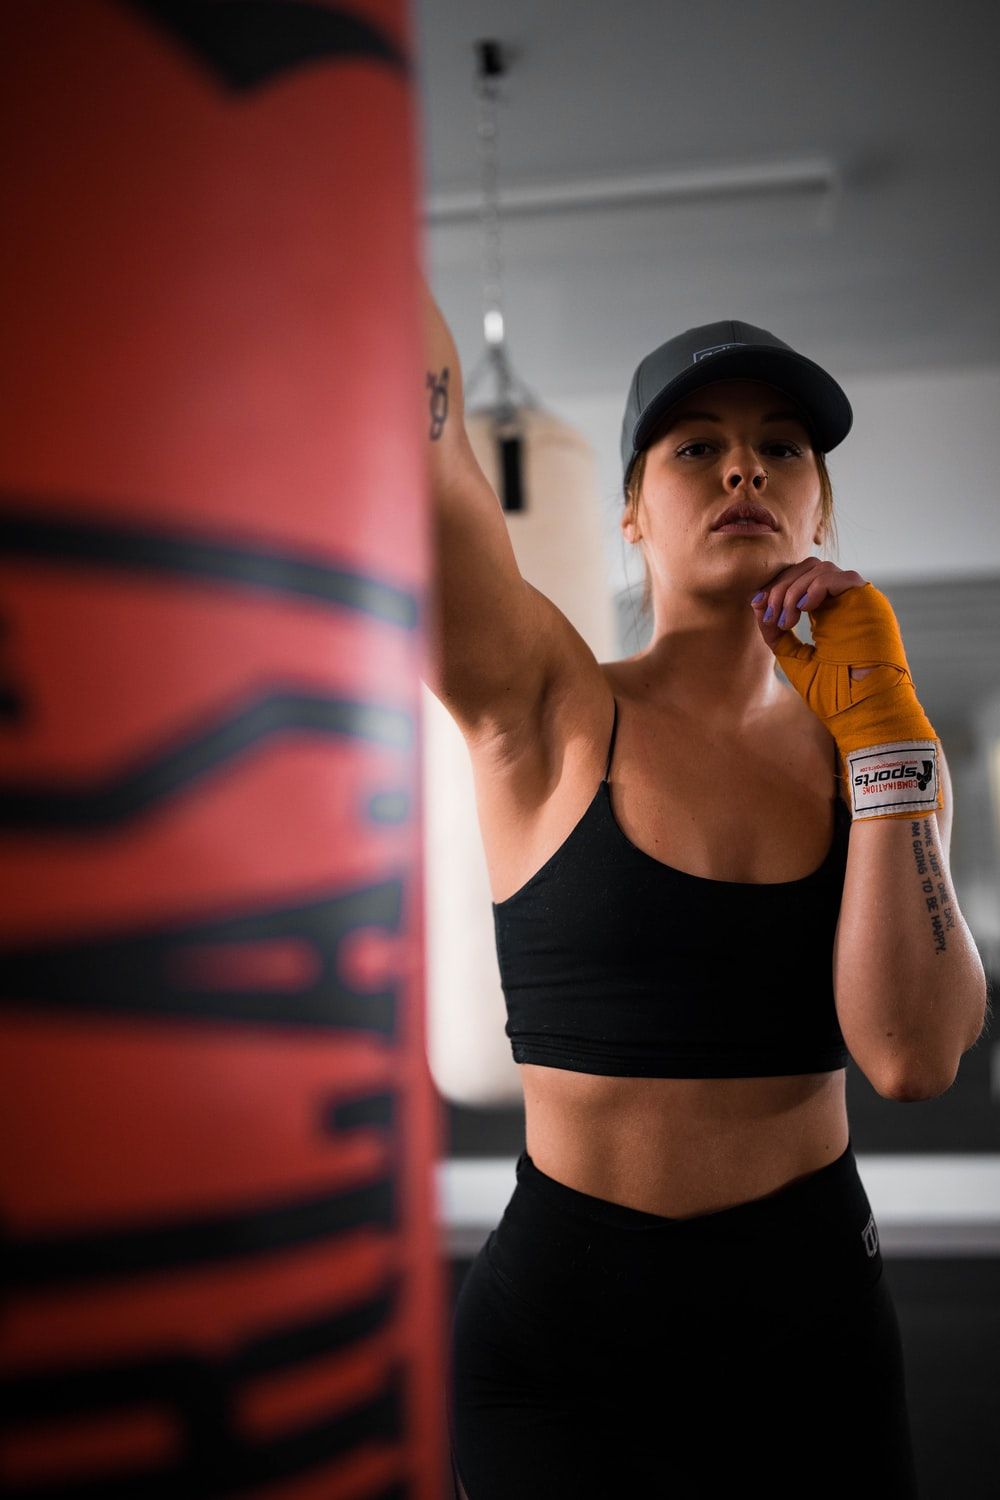 Girl Boxing Picture. Download Free Image